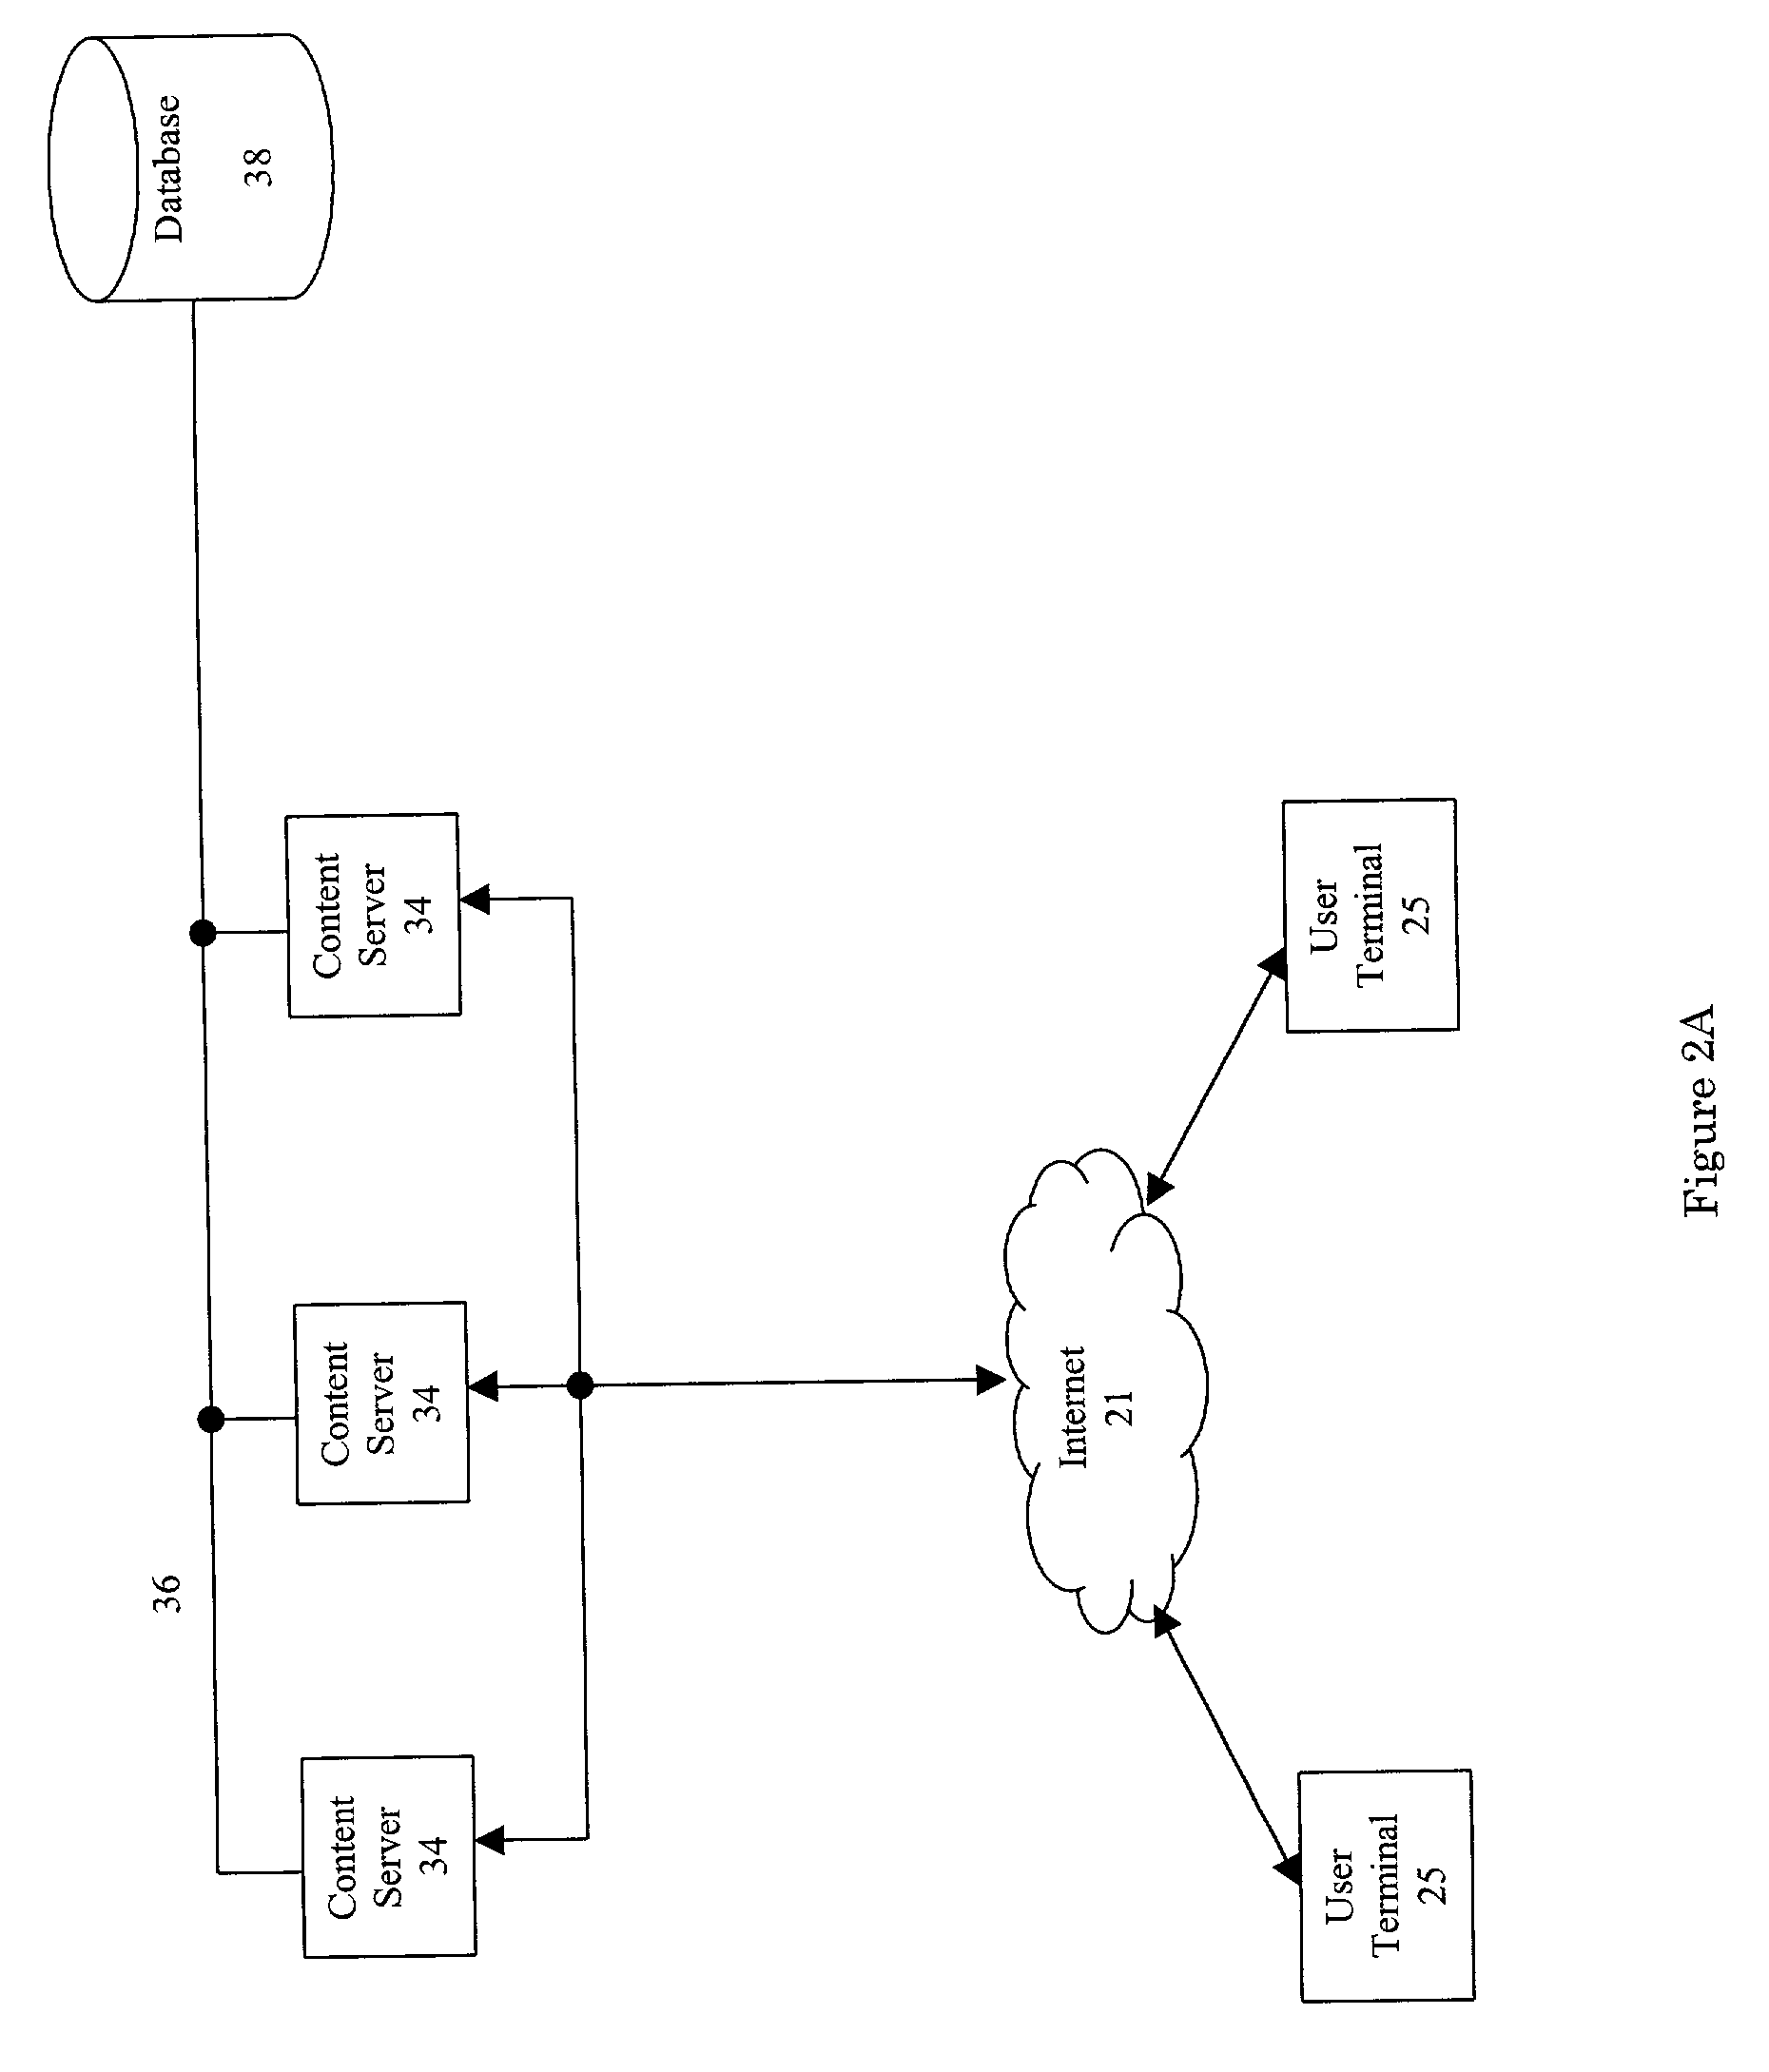 System and method for interacting with users over a communications network